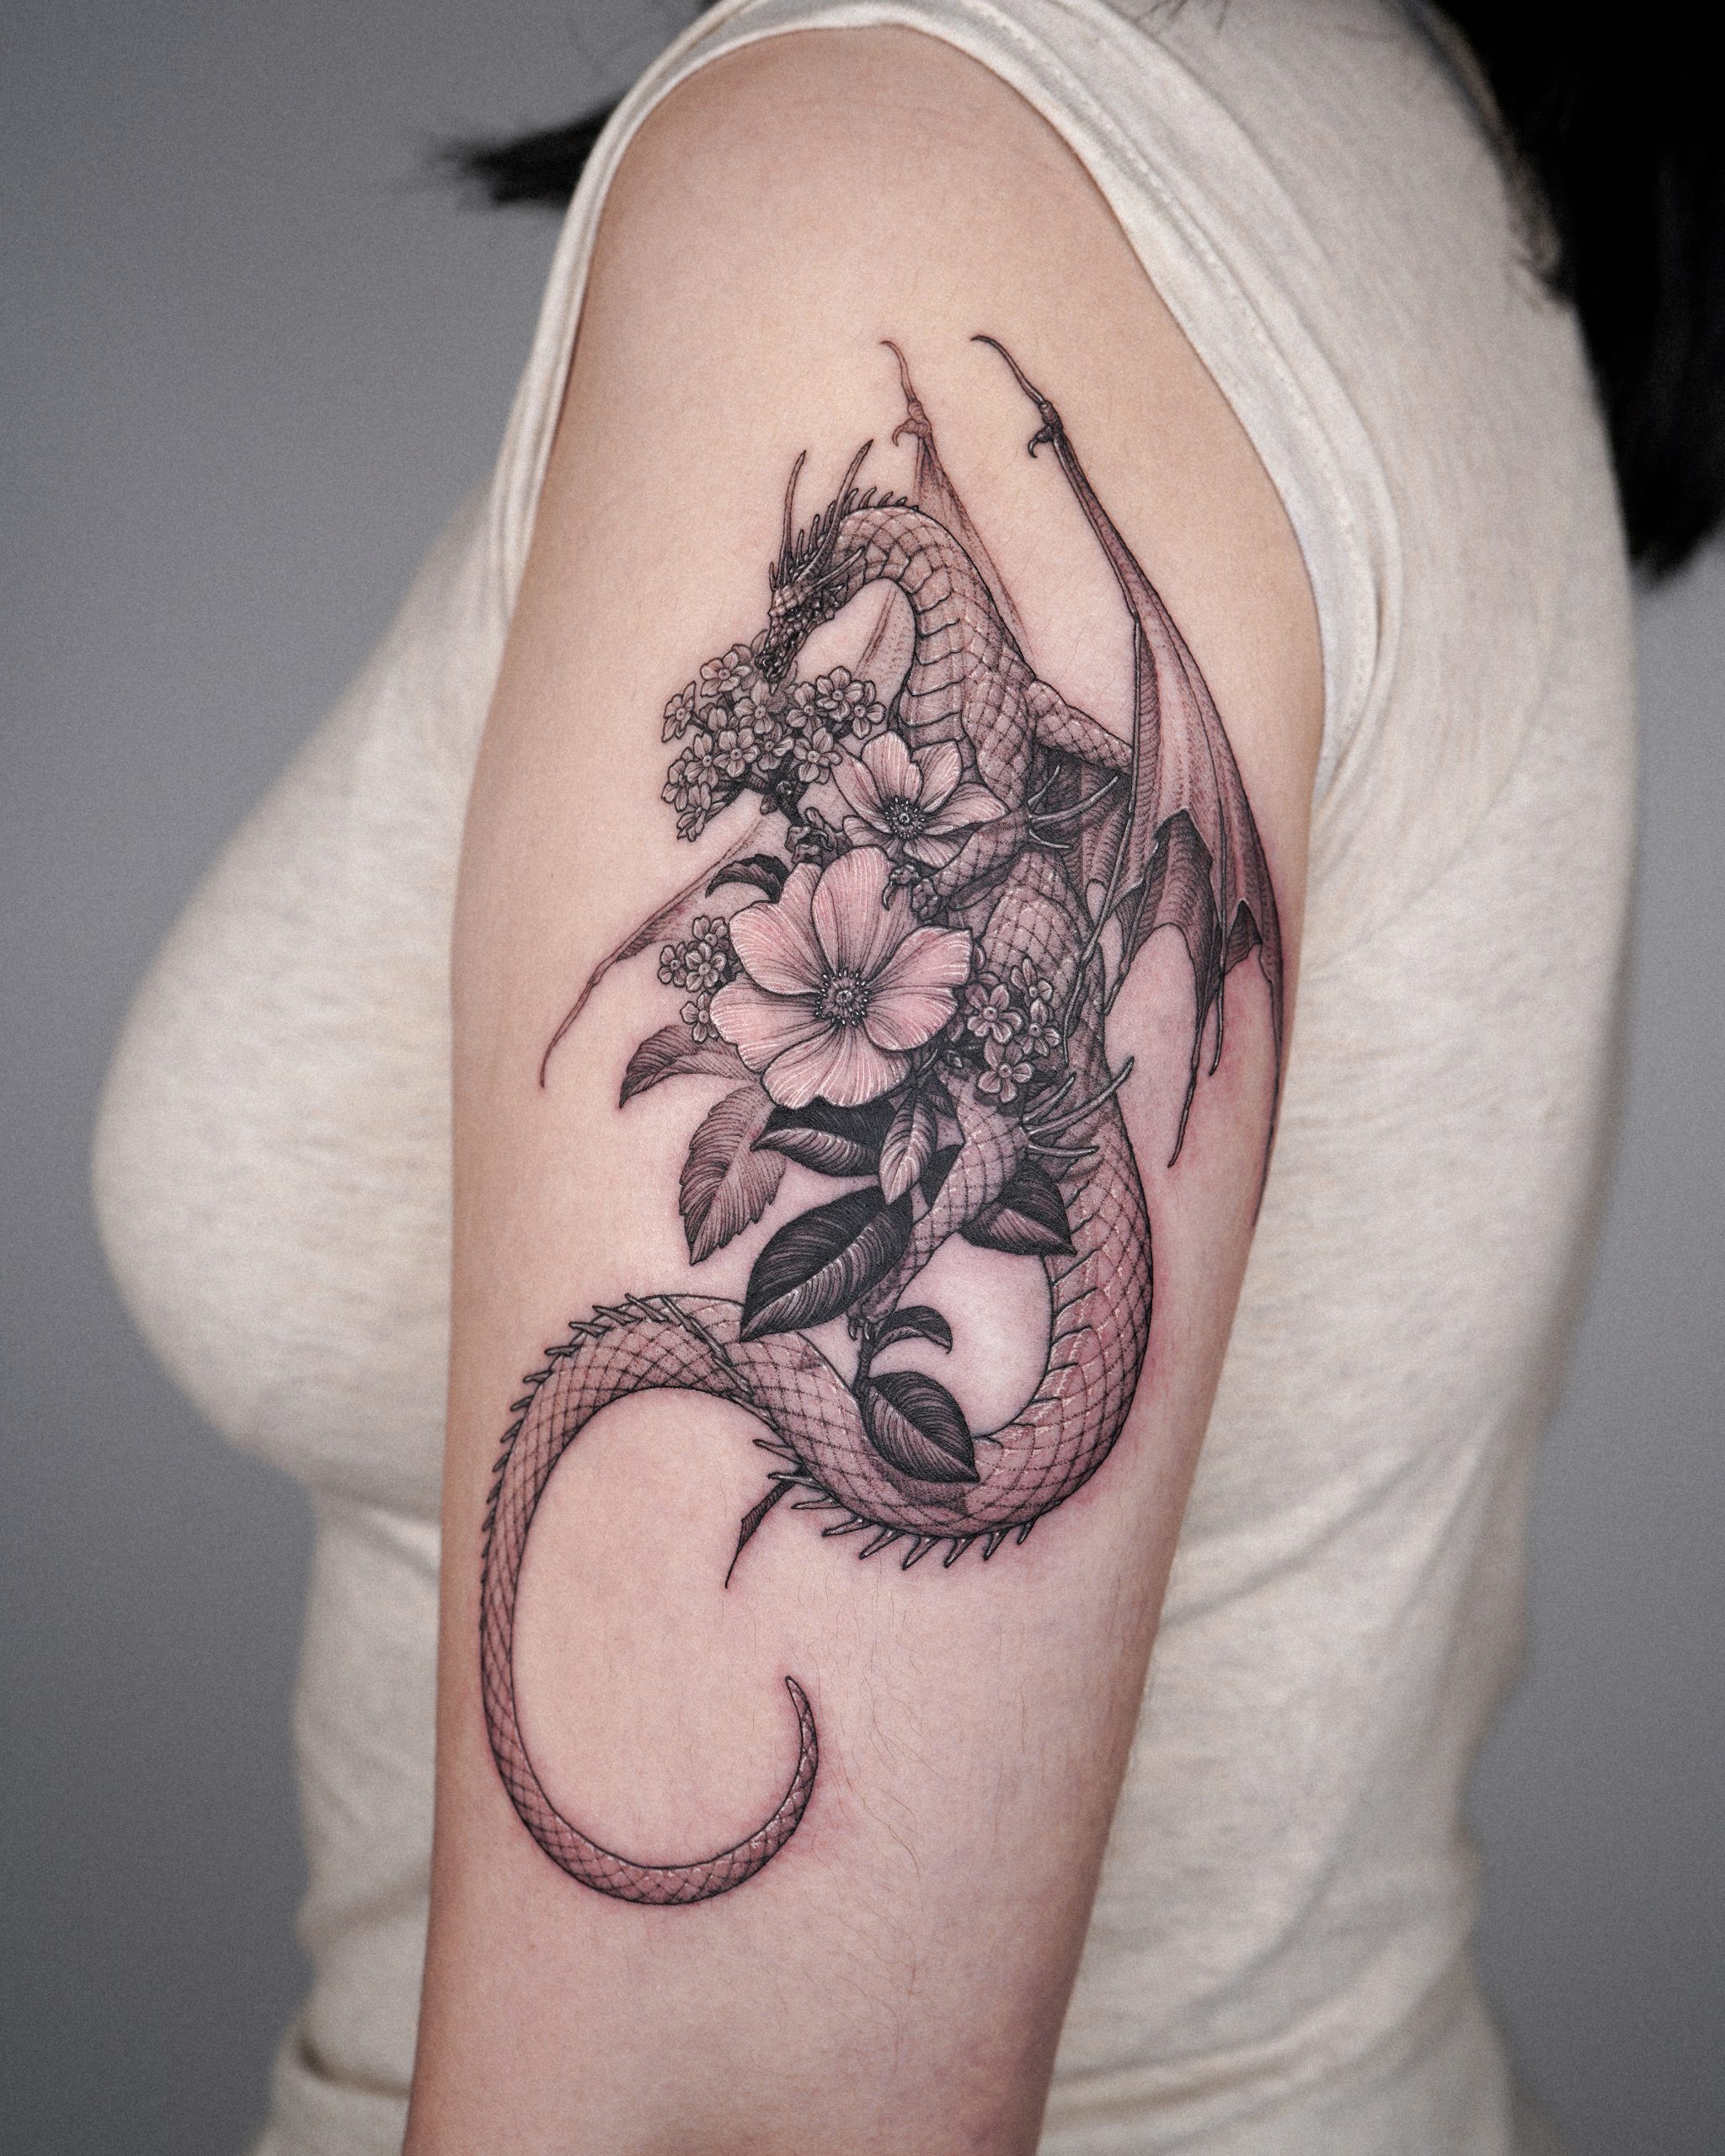 Color Dragon Tattoo Designs With Pictures - HubPages